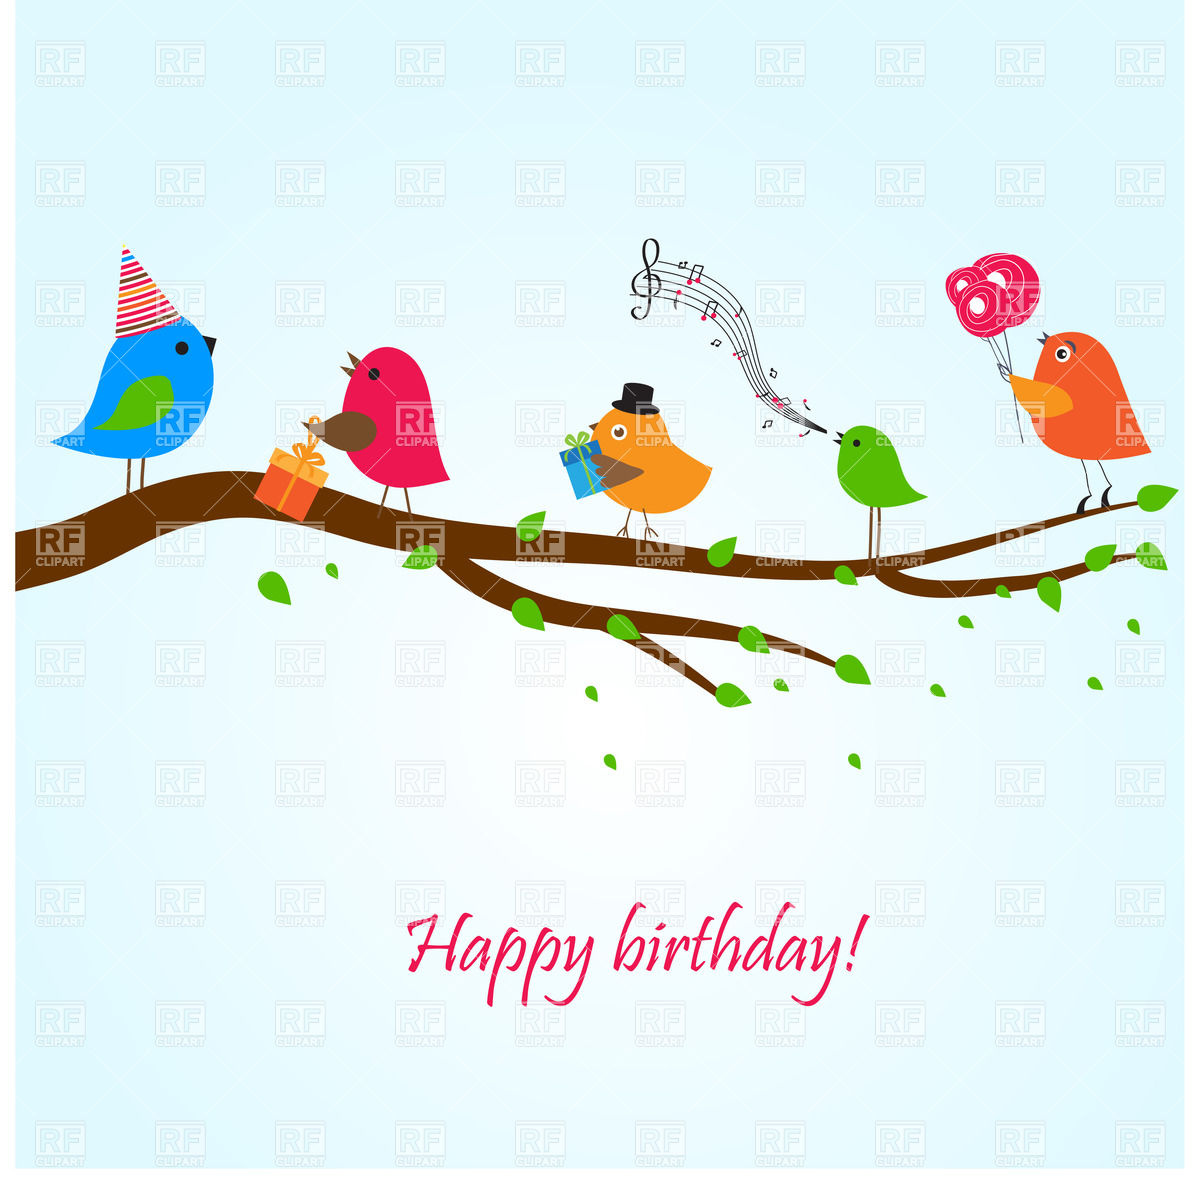 Birds On The Branch Singing Songs Download Royalty Free Vector Clipart